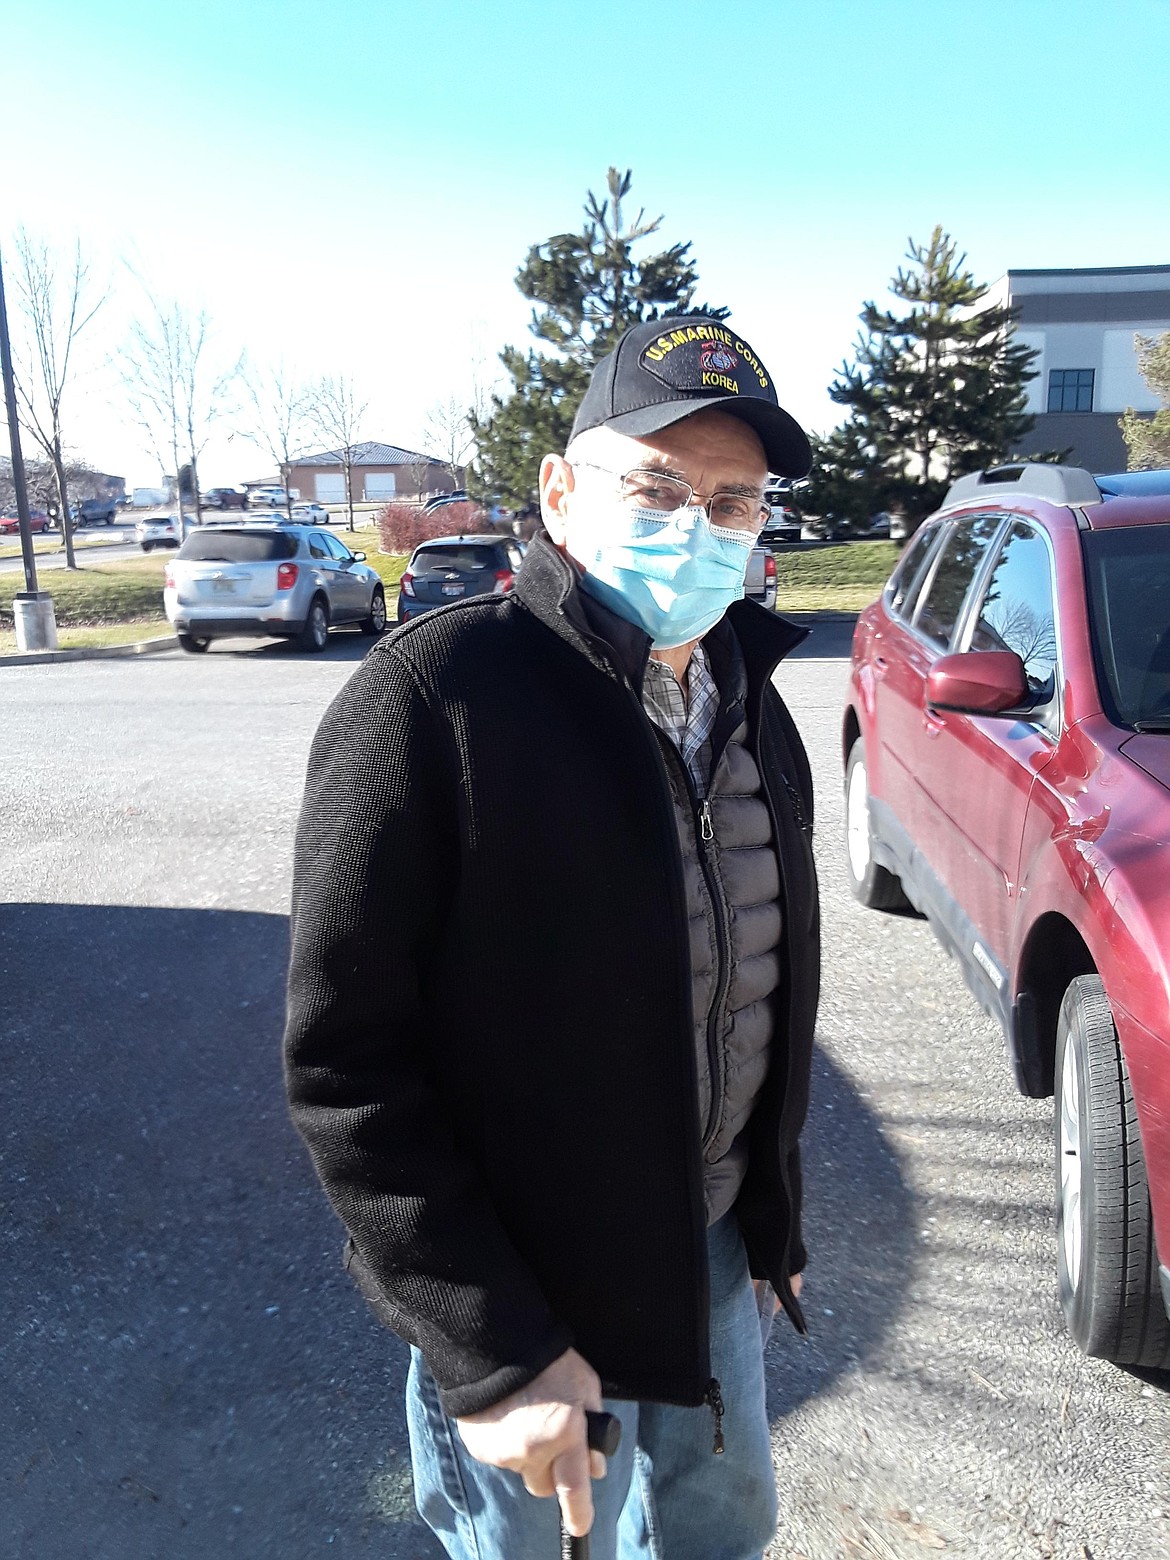 A masked Marvin Satuloff of Coeur d'Alene celebrated Friday with a smile (we think) after receiving the first dose of his COVID-19 vaccine. The local health district is asking for patience as distribution delays have cut Panhandle Health's weekly vaccine quantity down to roughly 2,800 doses per week. "It’s going to take us and our partners a while to get through this group," said Katherine Hoyer, public information officer for Panhandle Health. "That’s just the way that it is. We’re going to have to do this together.”